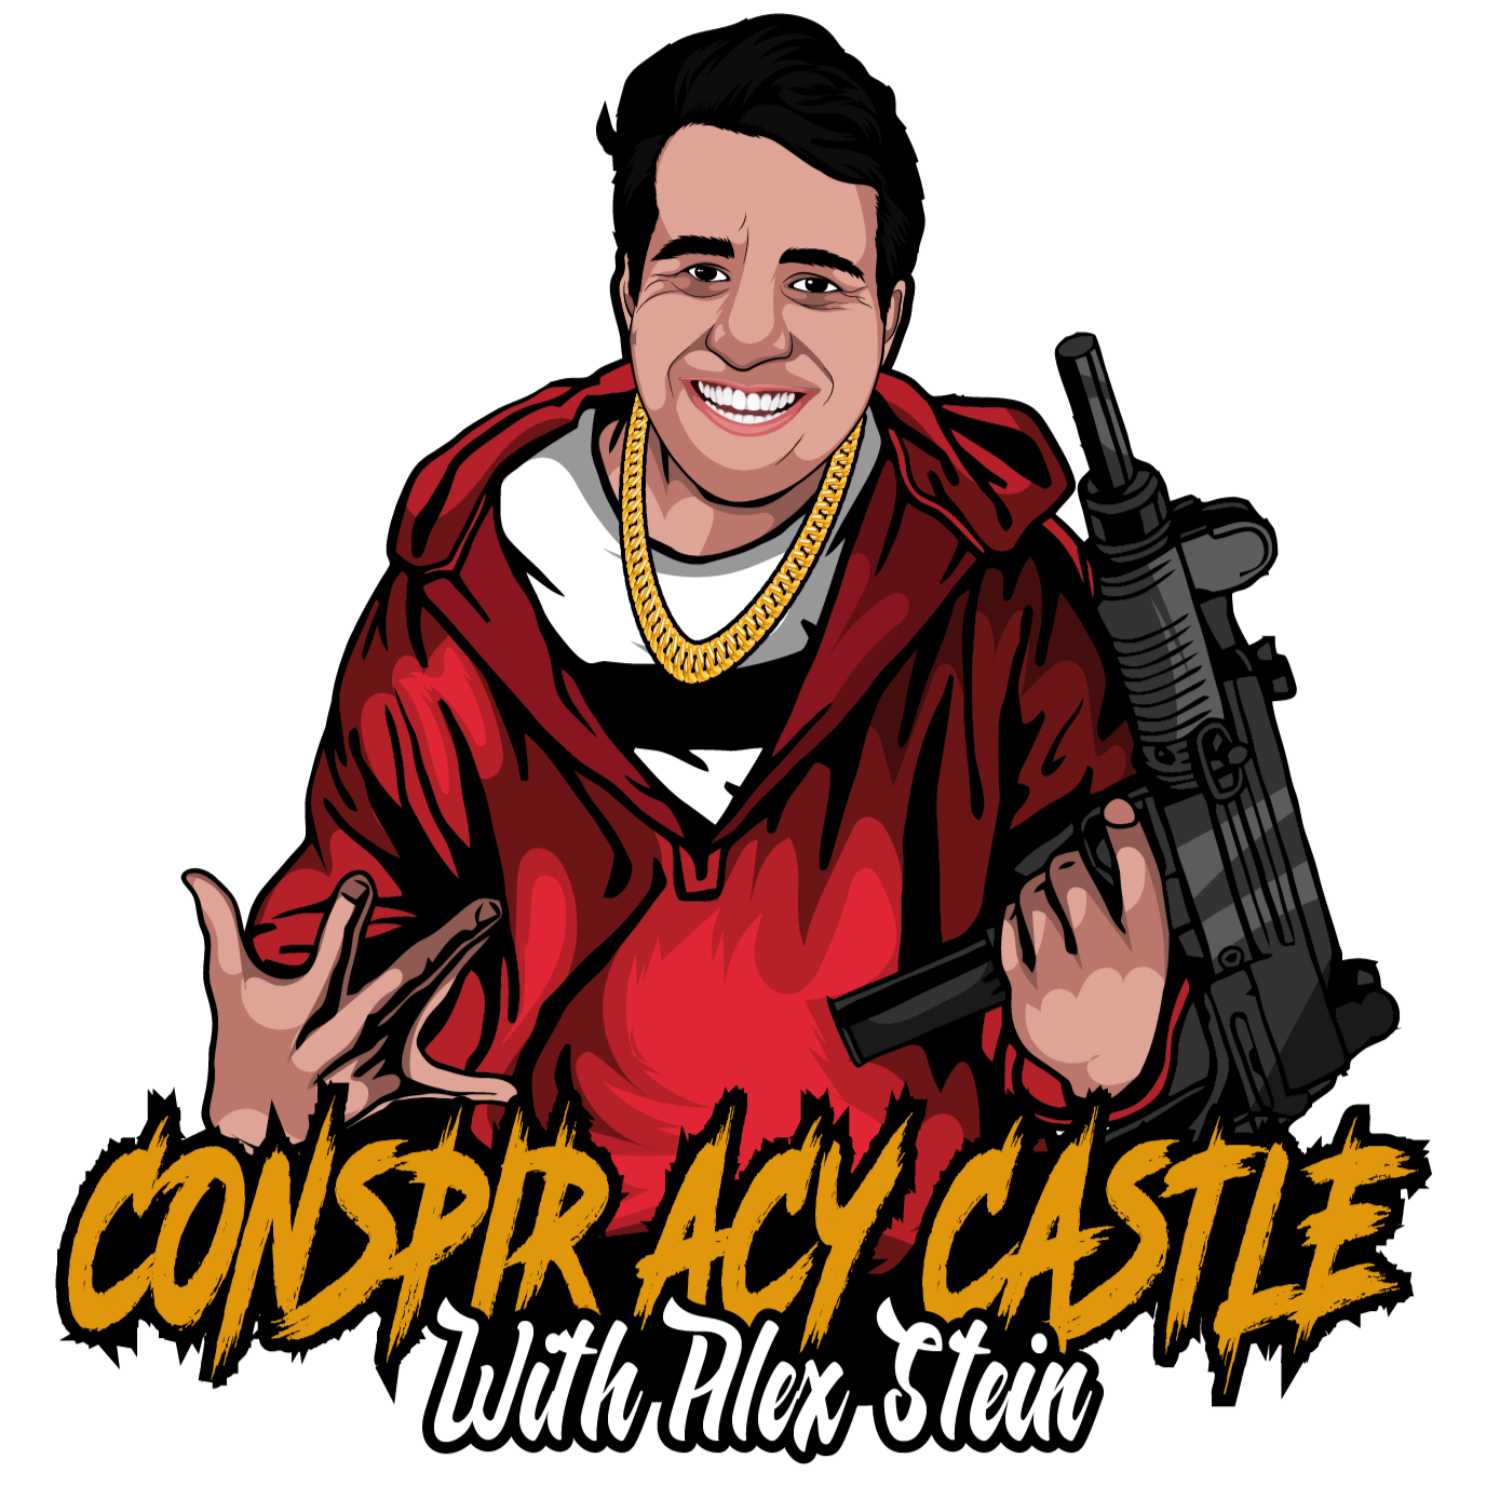 The Conspiracy Castle with #99 Alex Stein